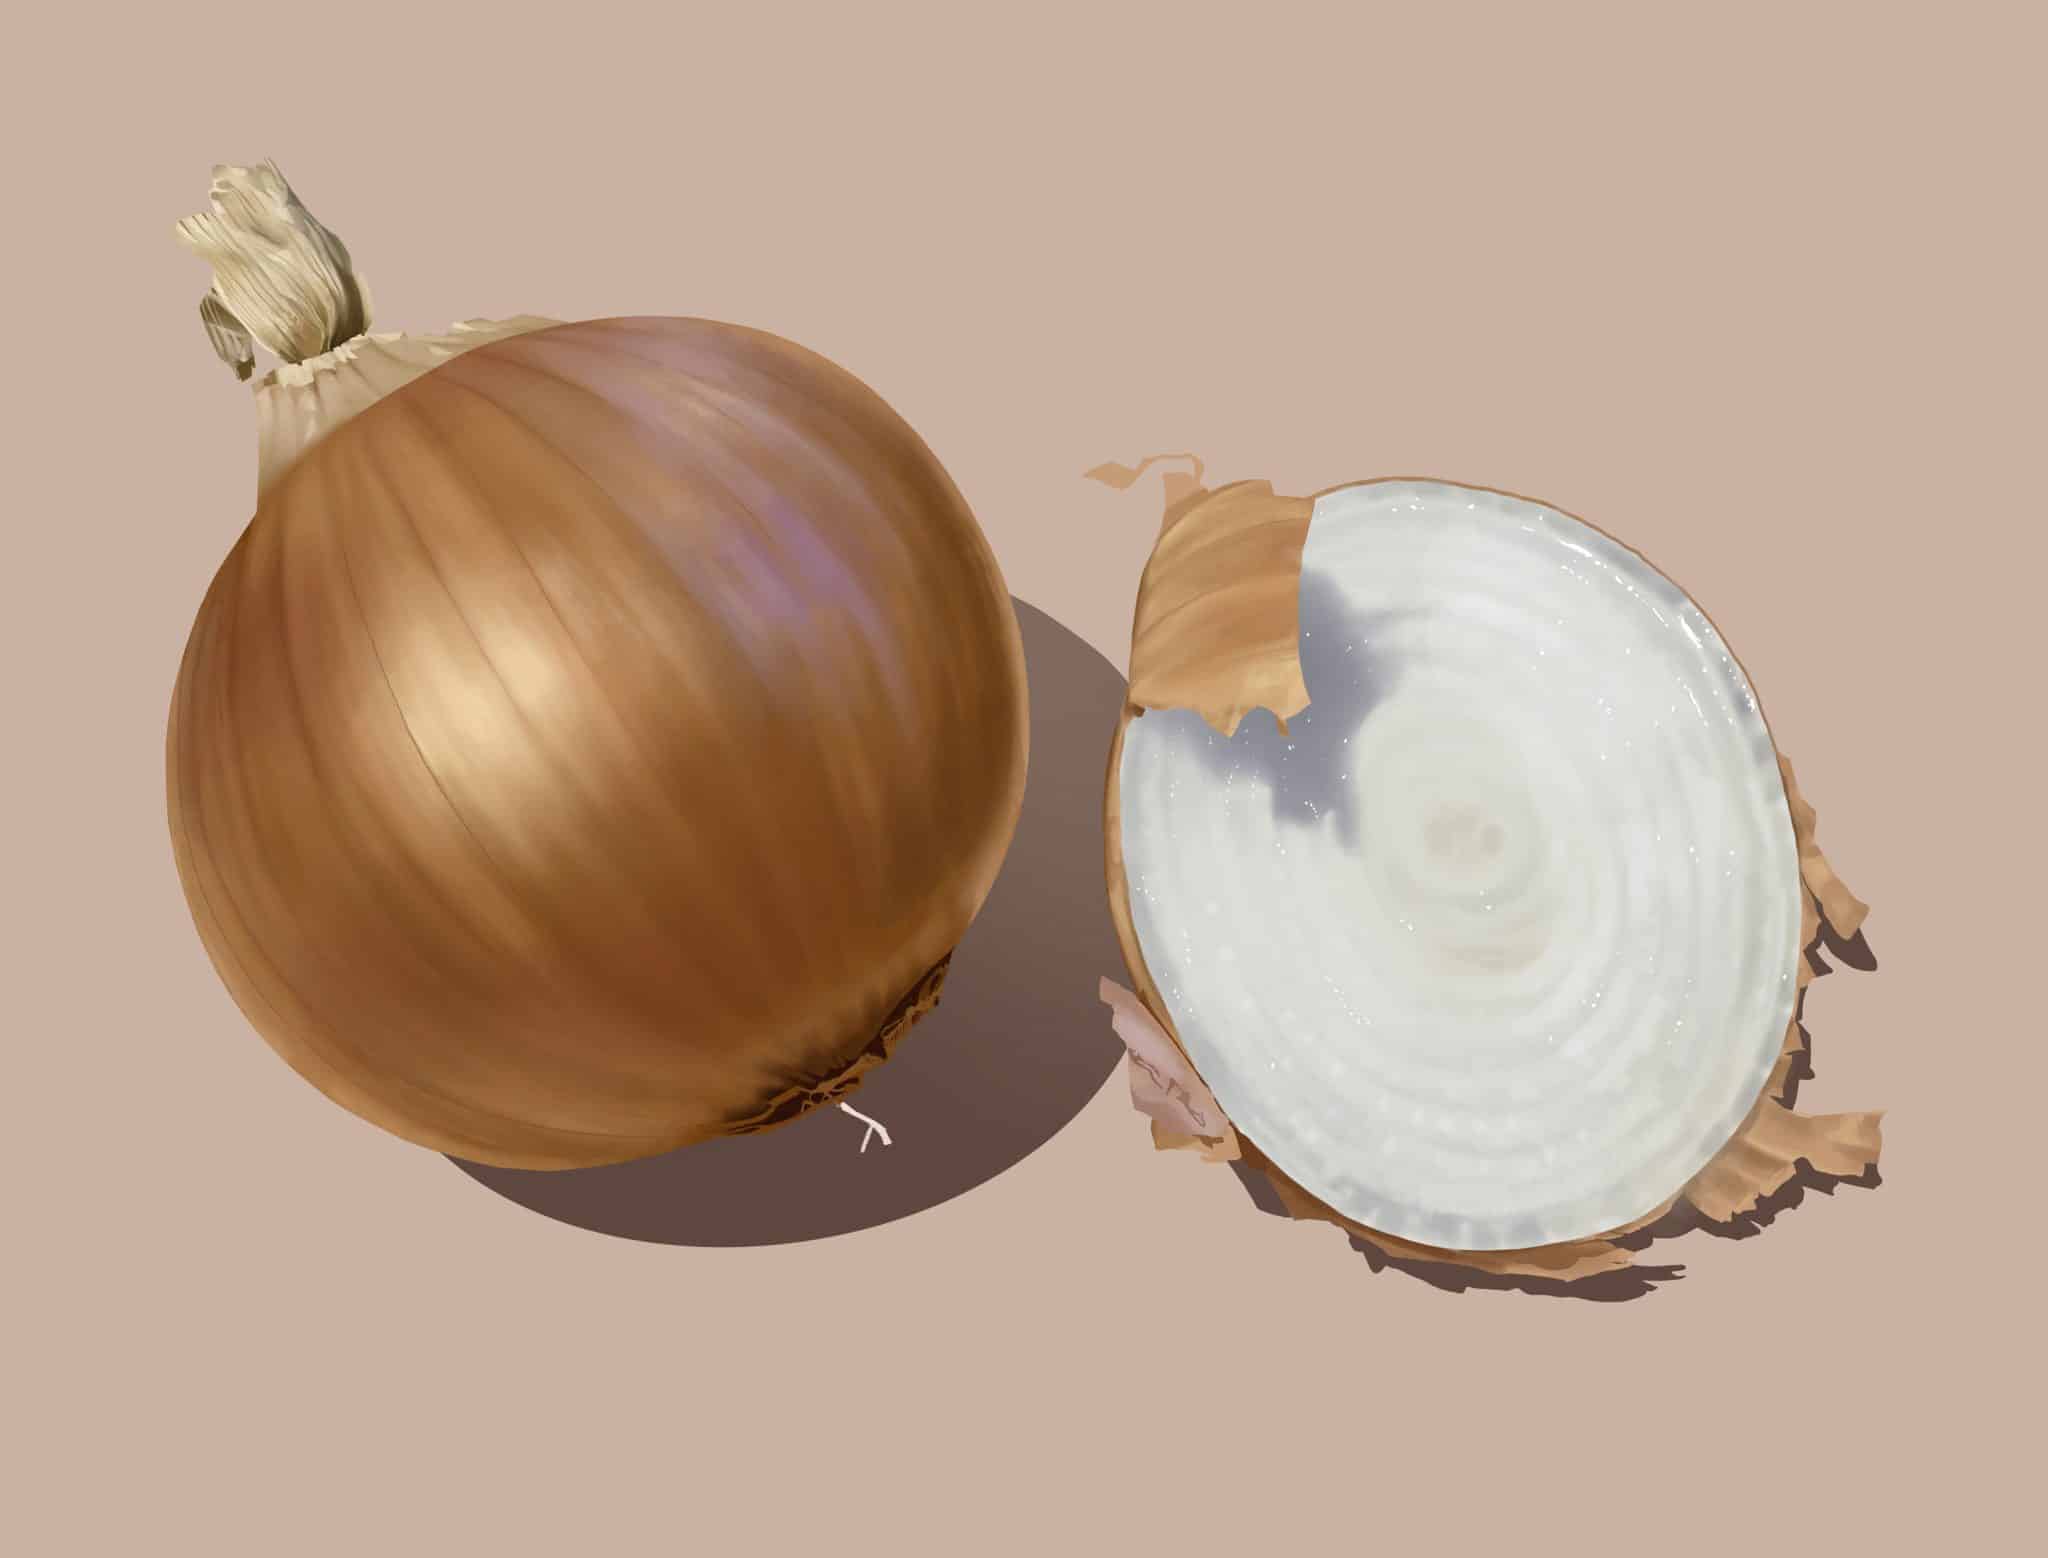 How to draw onion / Onion drawing - YouTube